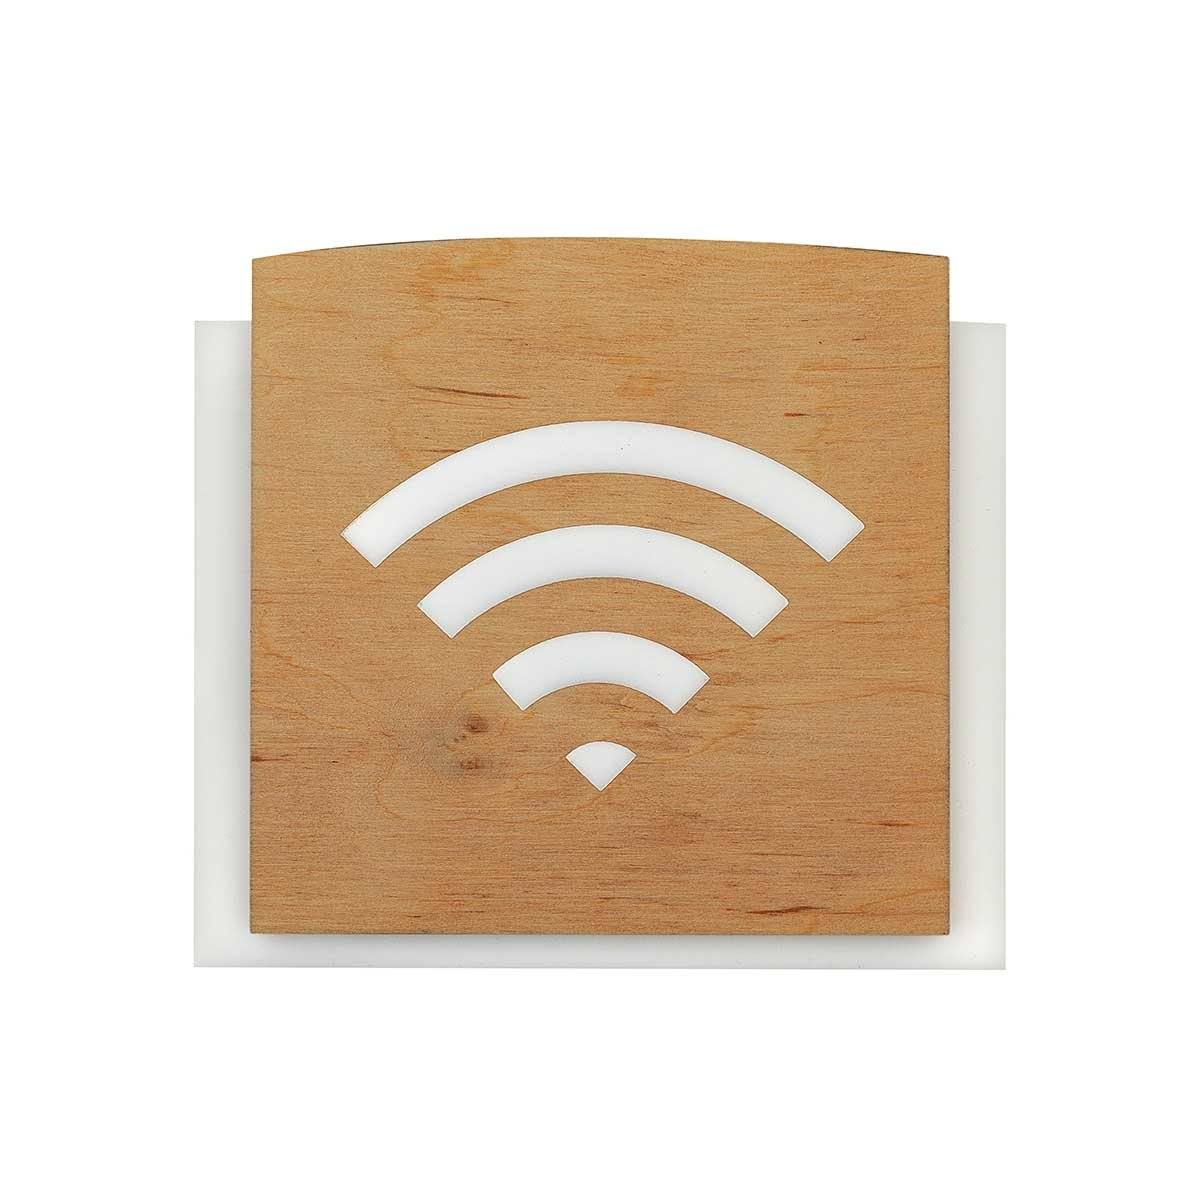 Wooden Wi-Fi Plate for Waiting Room Information signs Natural wood Bsign